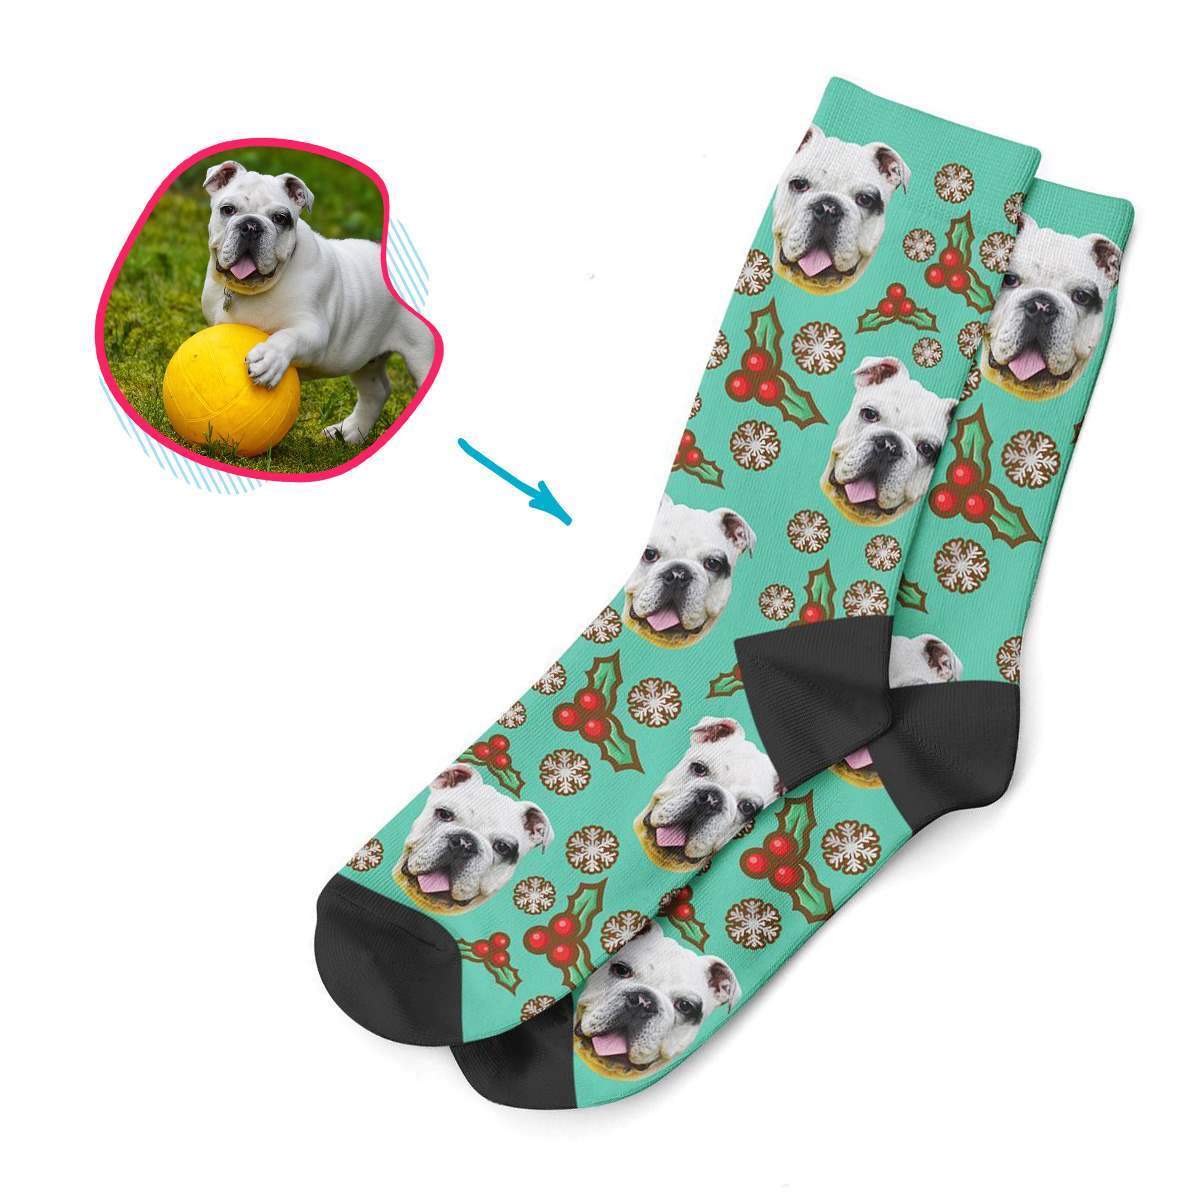 mint Mistletoe socks personalized with photo of face printed on them